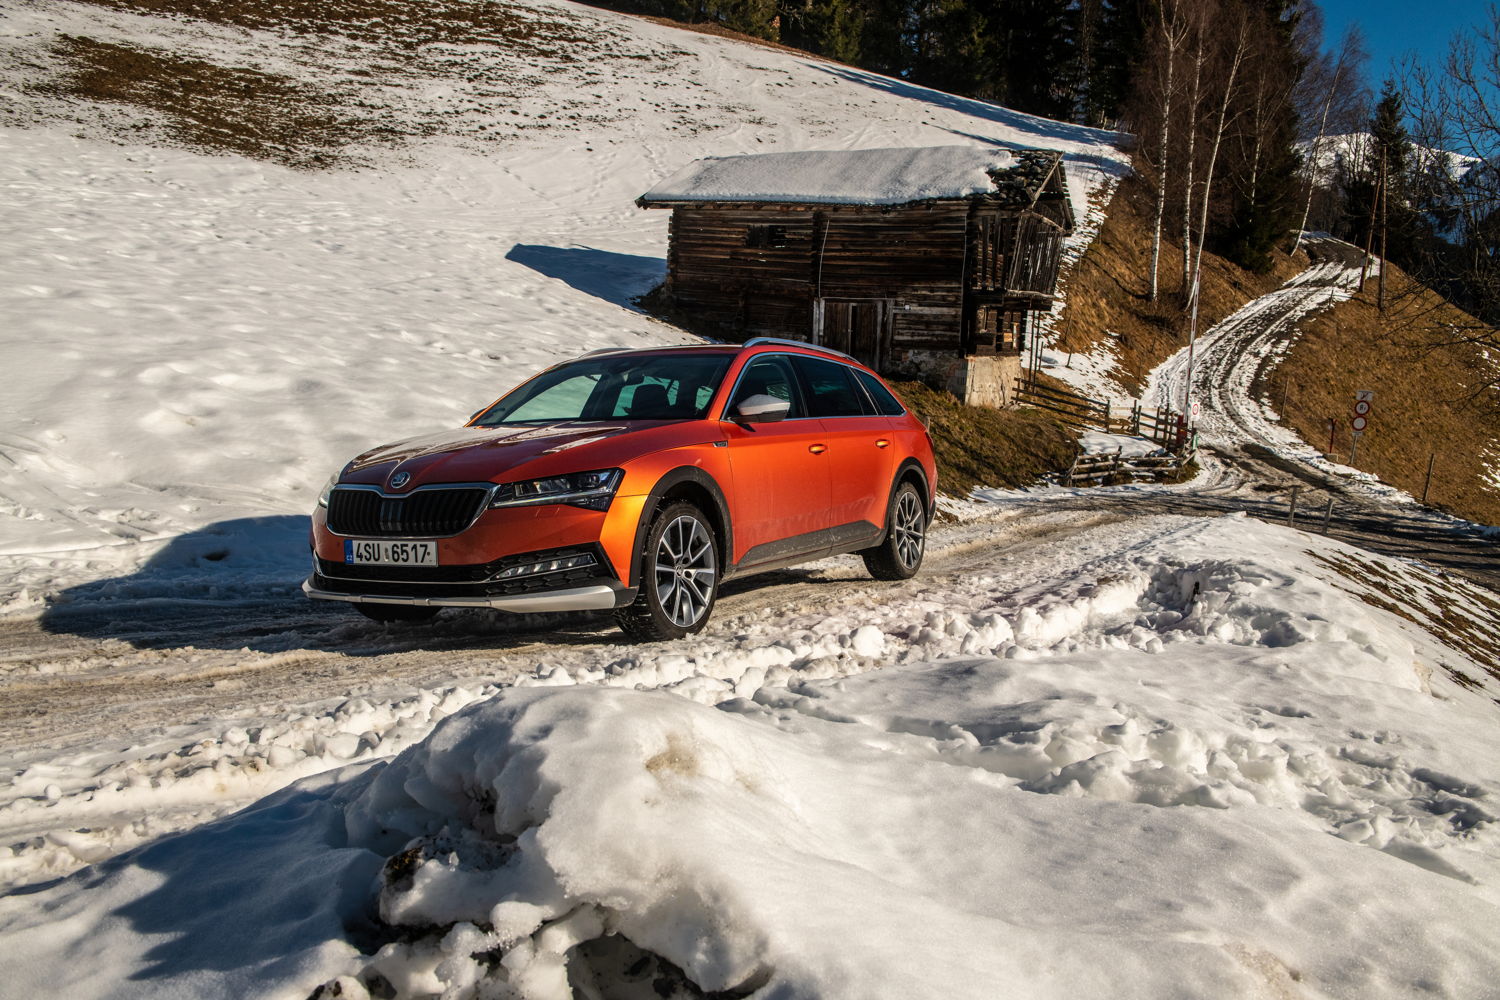 The ŠKODA SUPERB SCOUT is exclusively available
as an estate and is the only model that can be ordered
with the special Tangerine Orange finish.